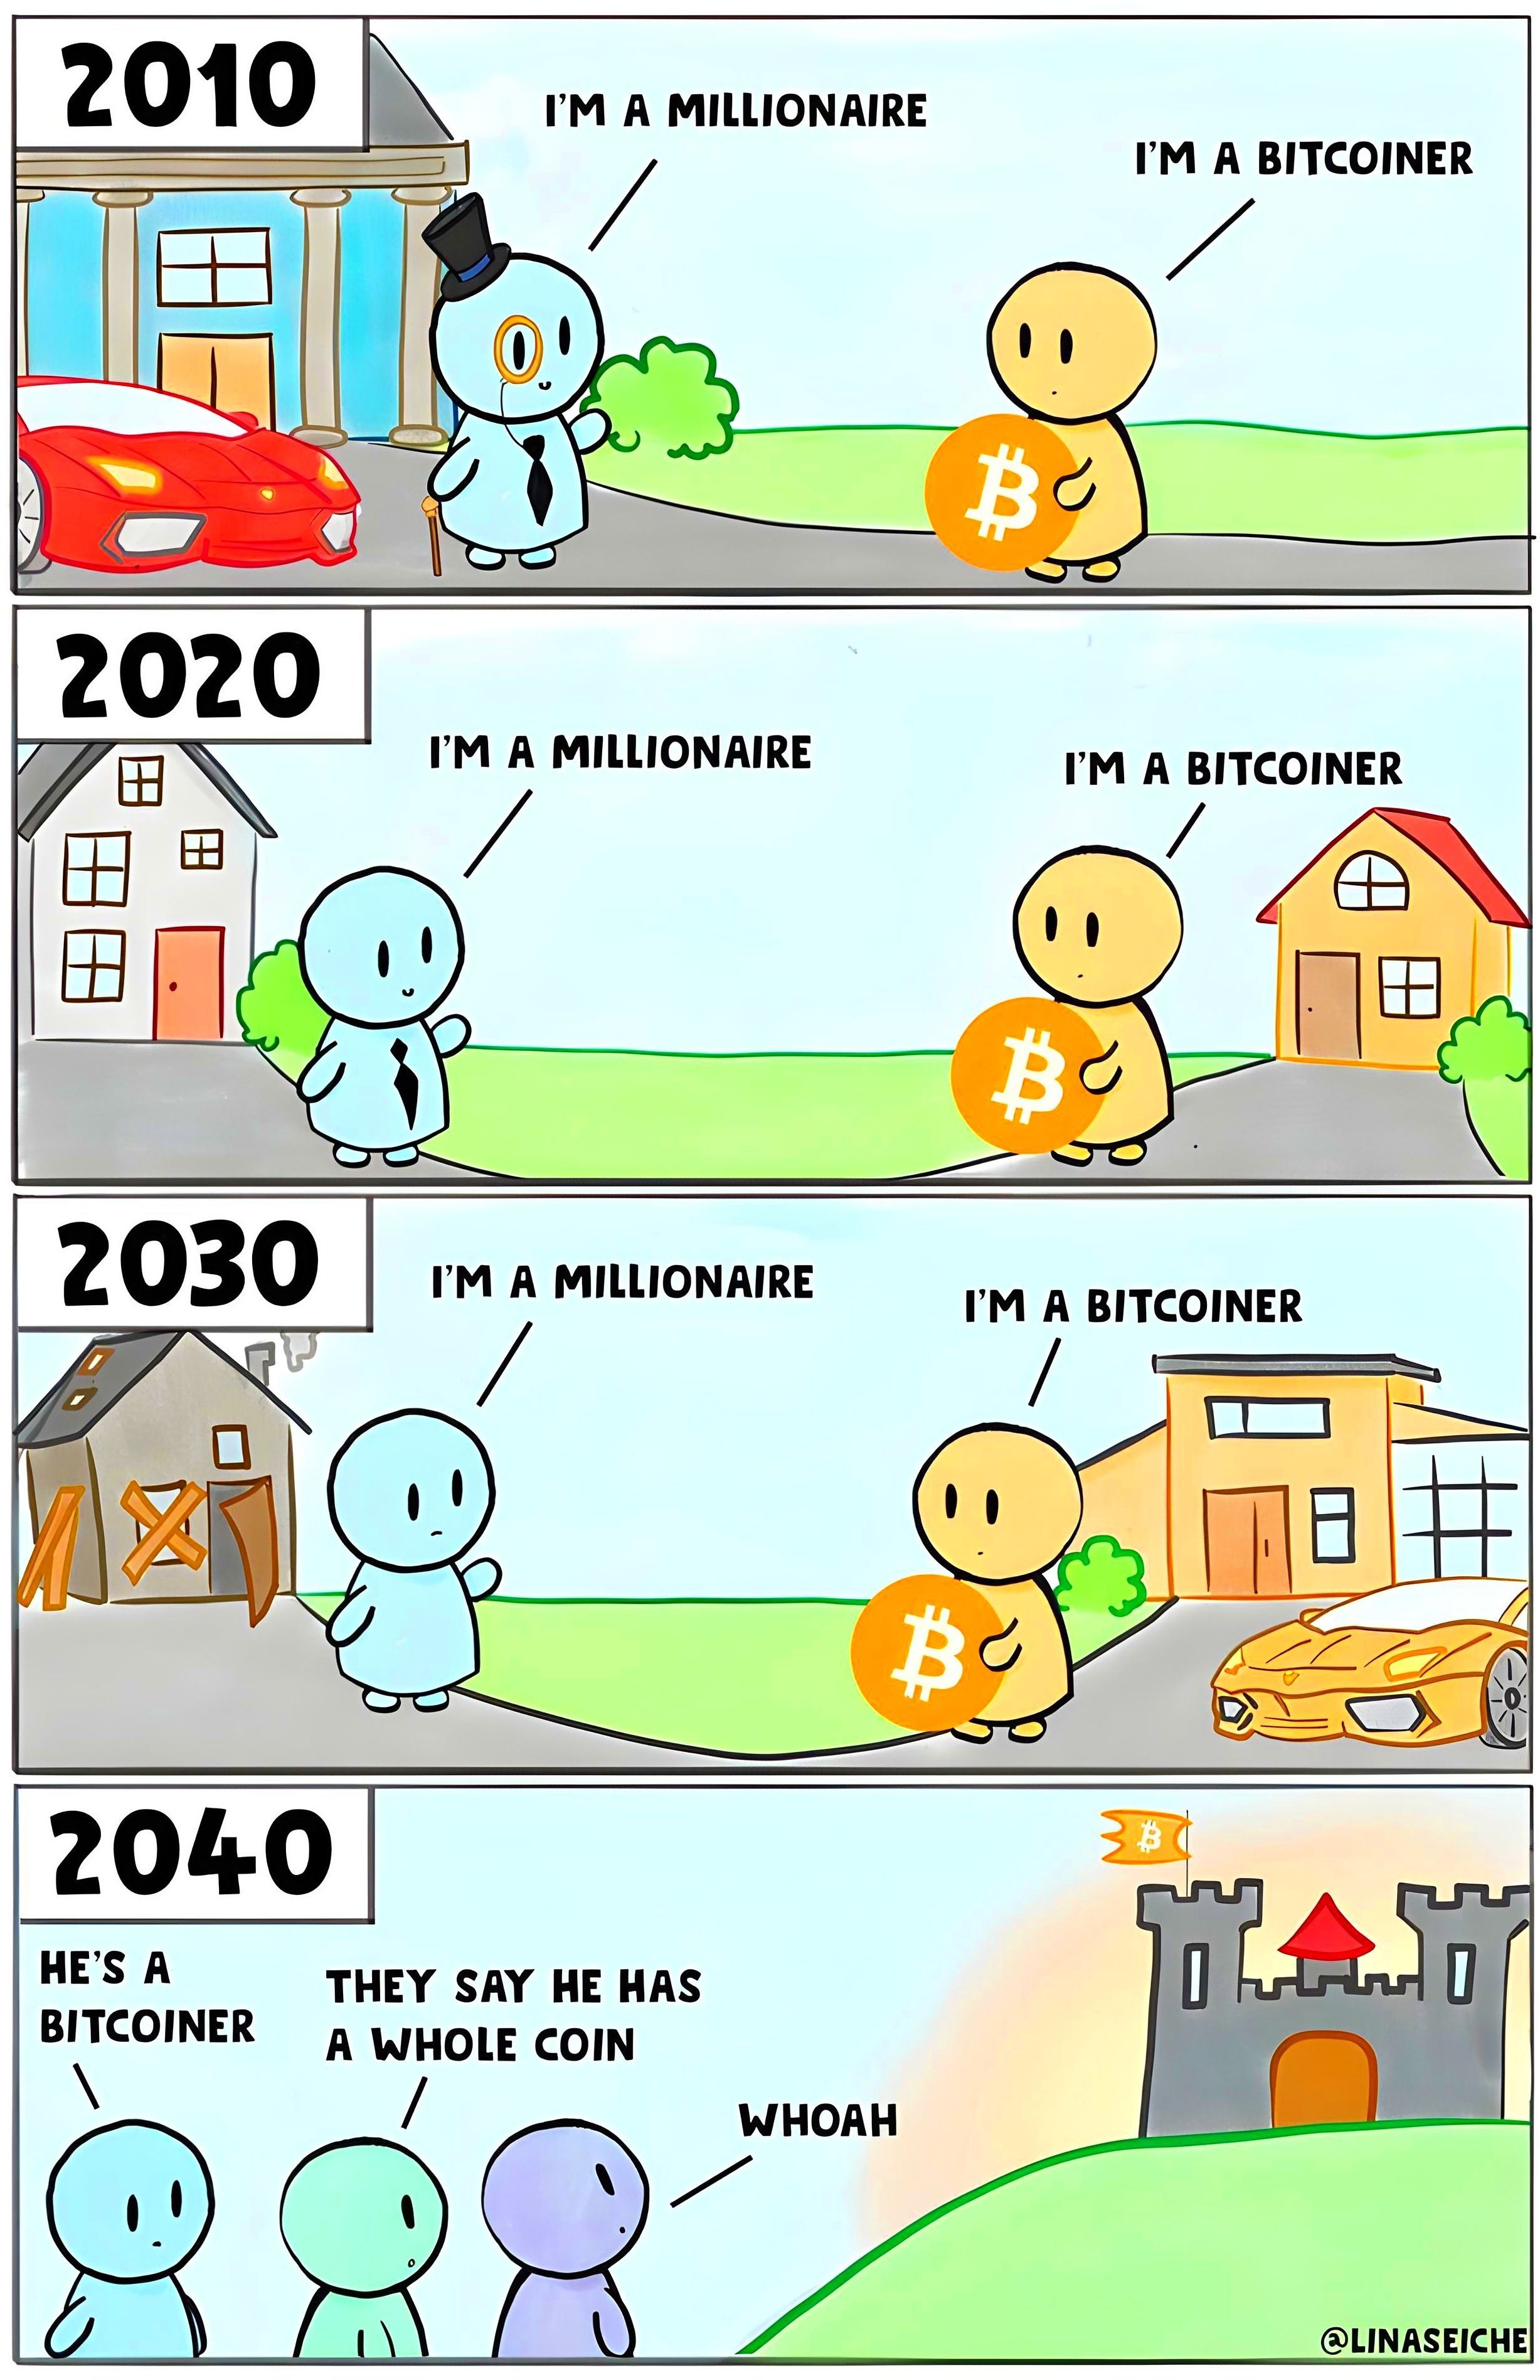 010 I'M A MILLIONAIRE
—— — | / I'M A BITCOINER
/HAN / /E N
d2030 M A MILLIONAIRE I'M A BITCOINER
| 7 74dg) C OSO s oS a v
2 040
HE'S A THEY SAY HE HAS 0 I
BITCOINER WHOLE COIN N\ / WHORH
() (y728 [1 [ p @LINASEICH